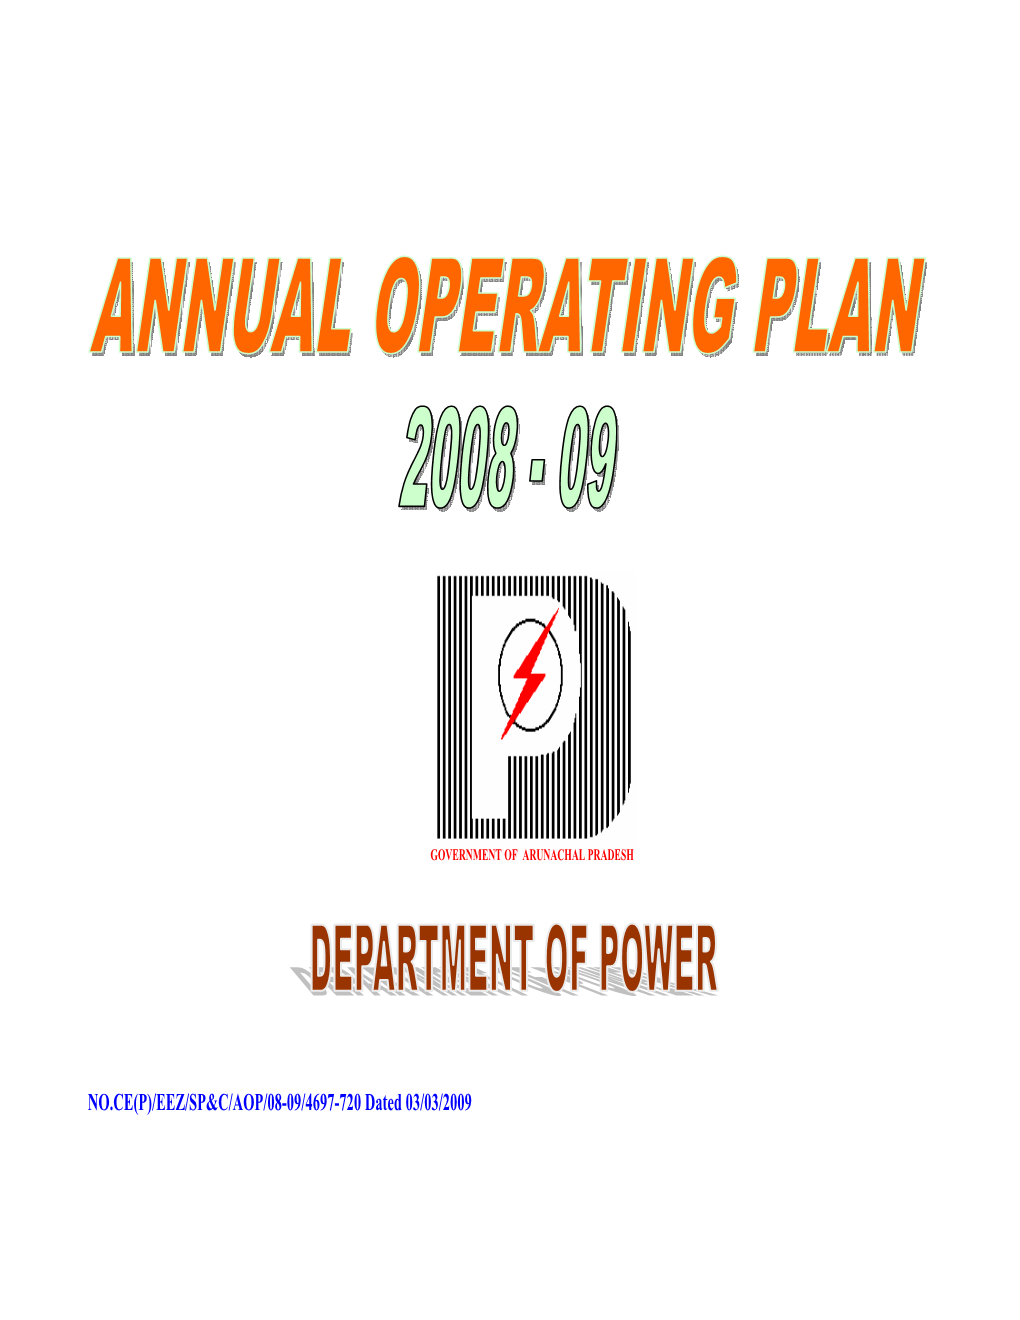 Annual Operating Plan 2008-09 Outlay and Expenditure of Centrally Sponsored Schemes Including Fully Funded by Govt